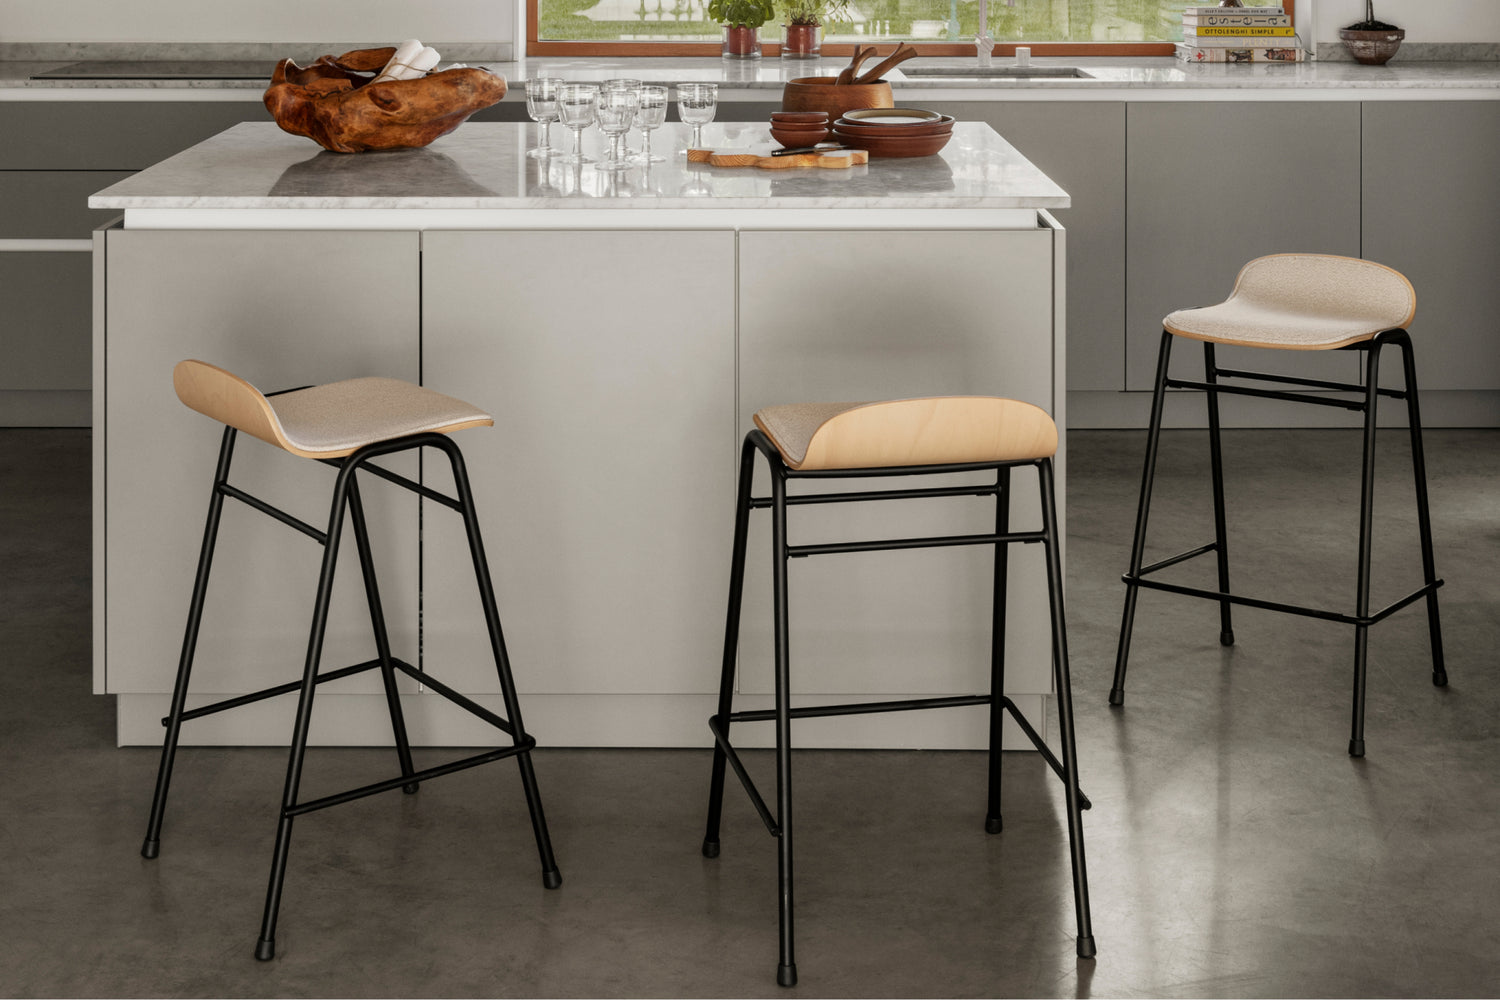 Hem - A lifestyle image featuring Touchwood Counter Stools.